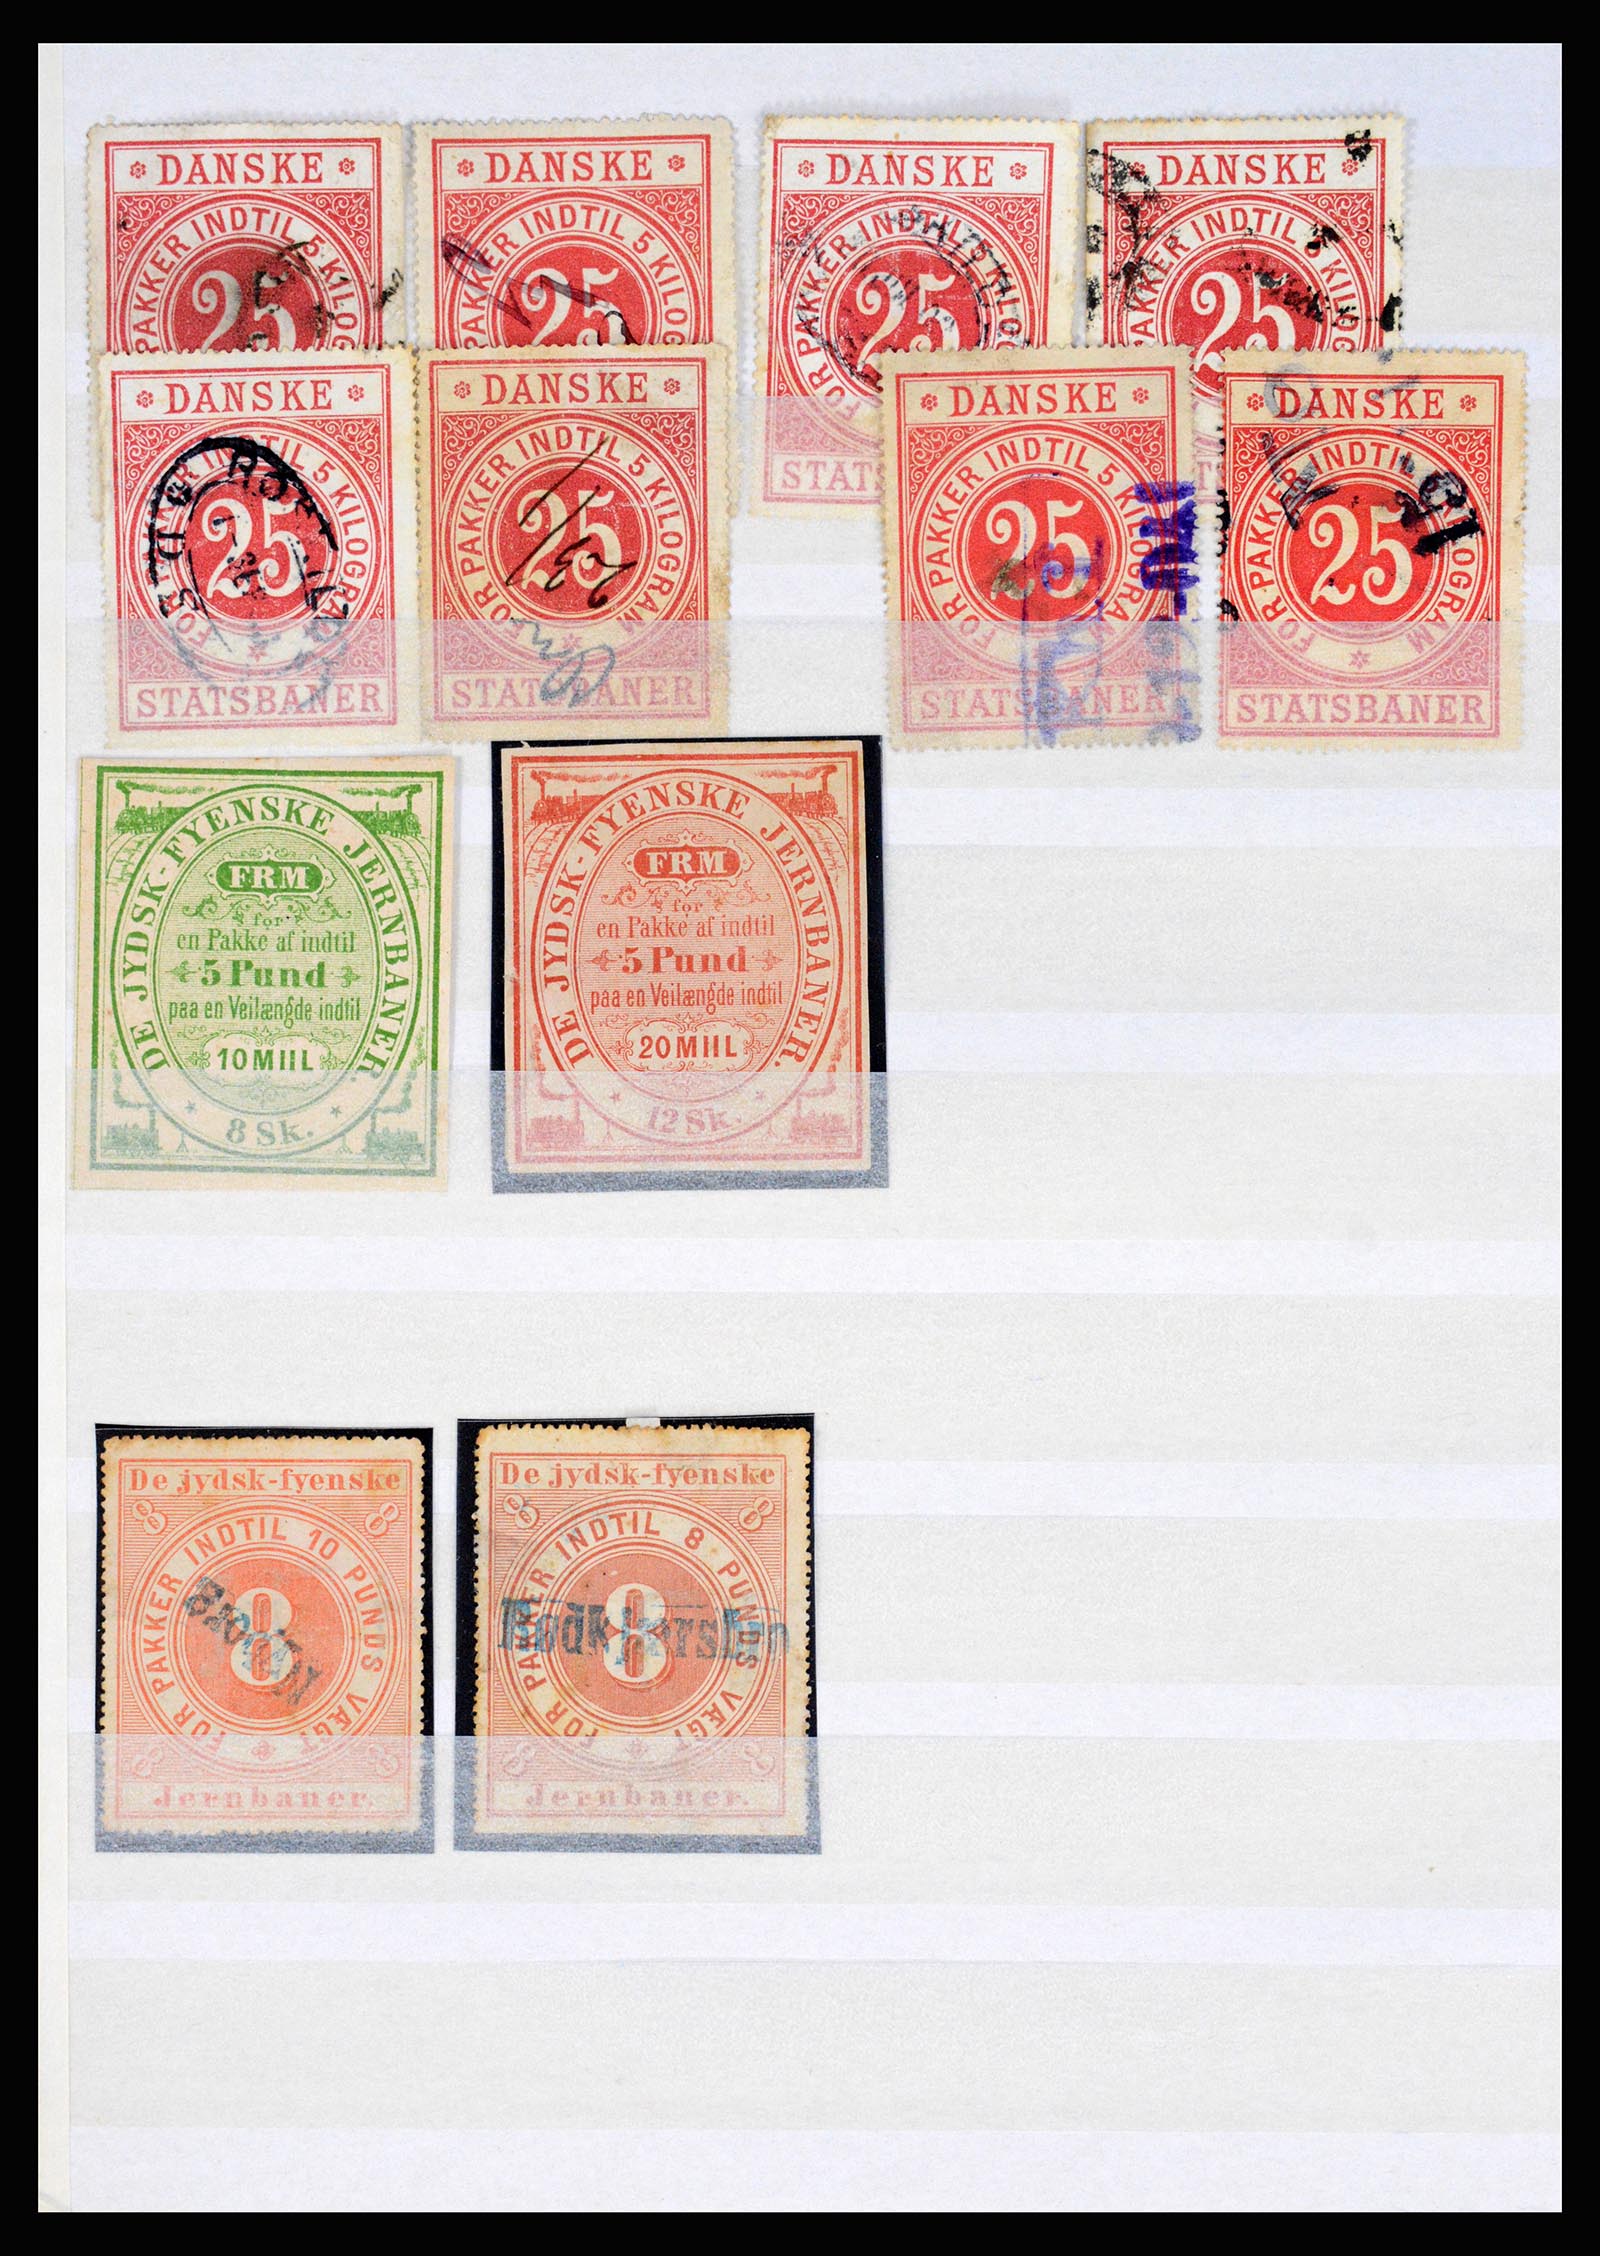 36982 002 - Stamp collection 36982 Denmark railroad stamps.